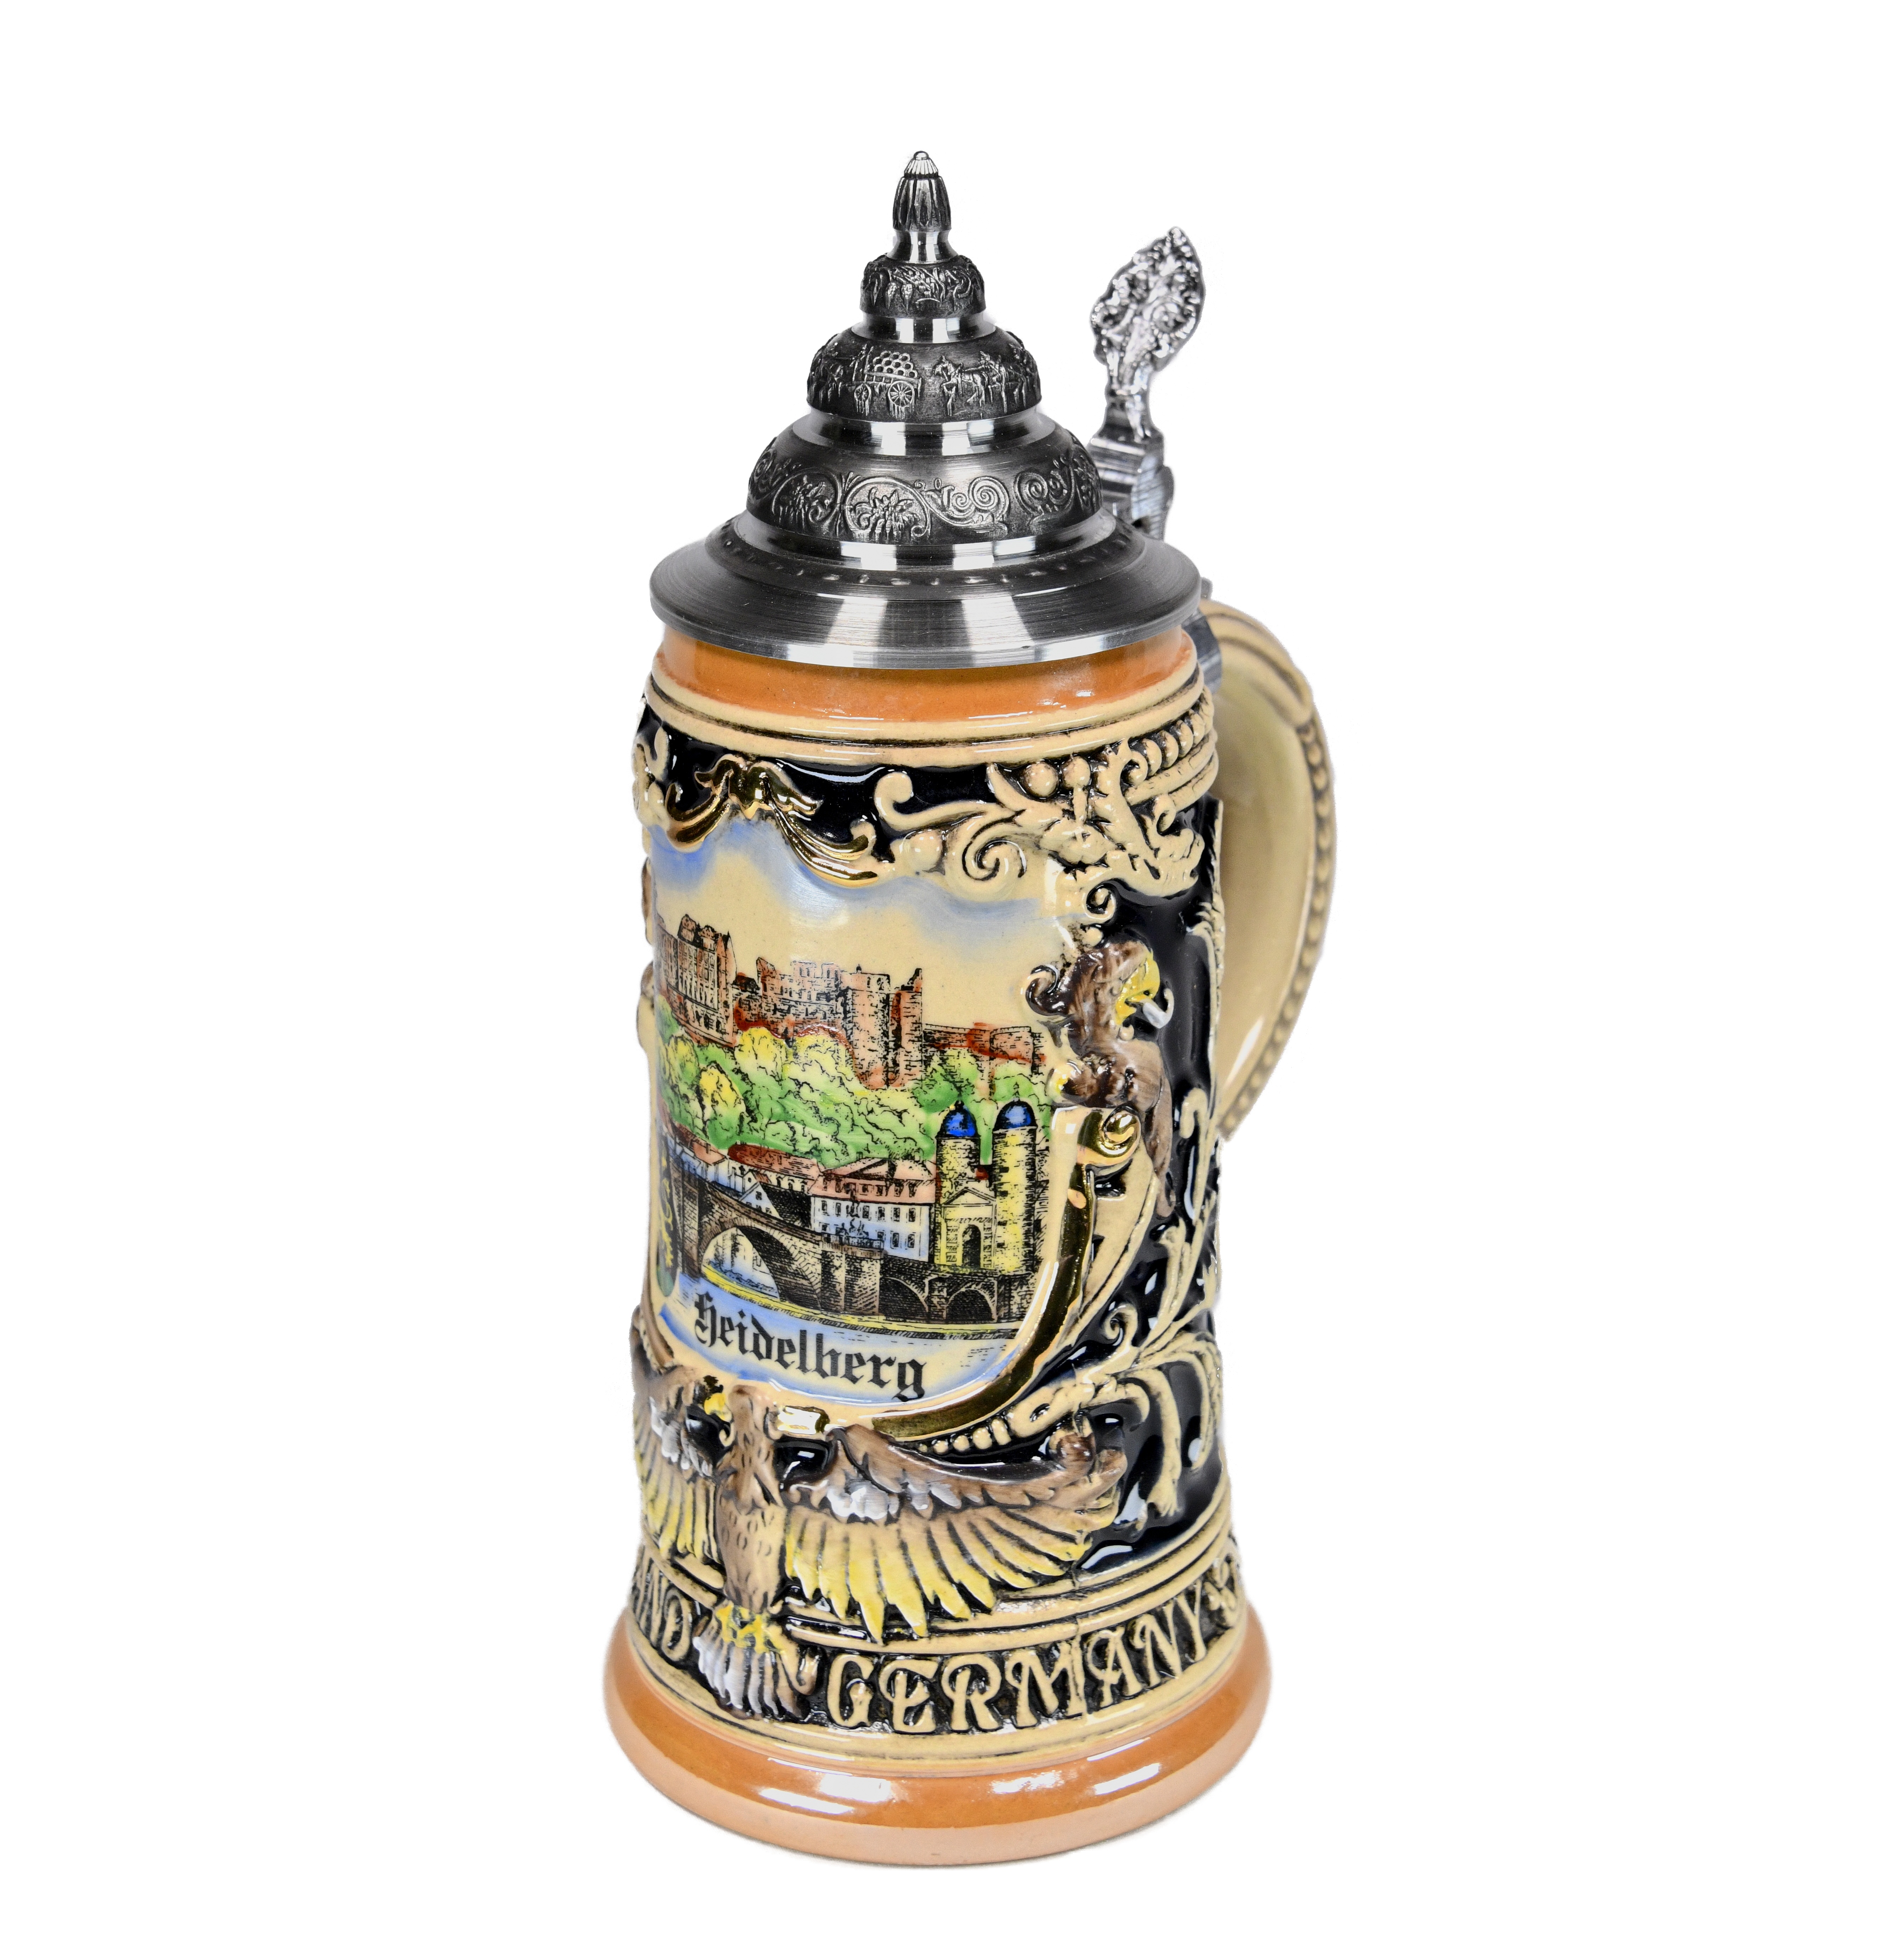 Beer stein by King - Heidelberg City Skyline Relief Authentic German Beer Stein 0.4l Limited Edition - image 1 of 6